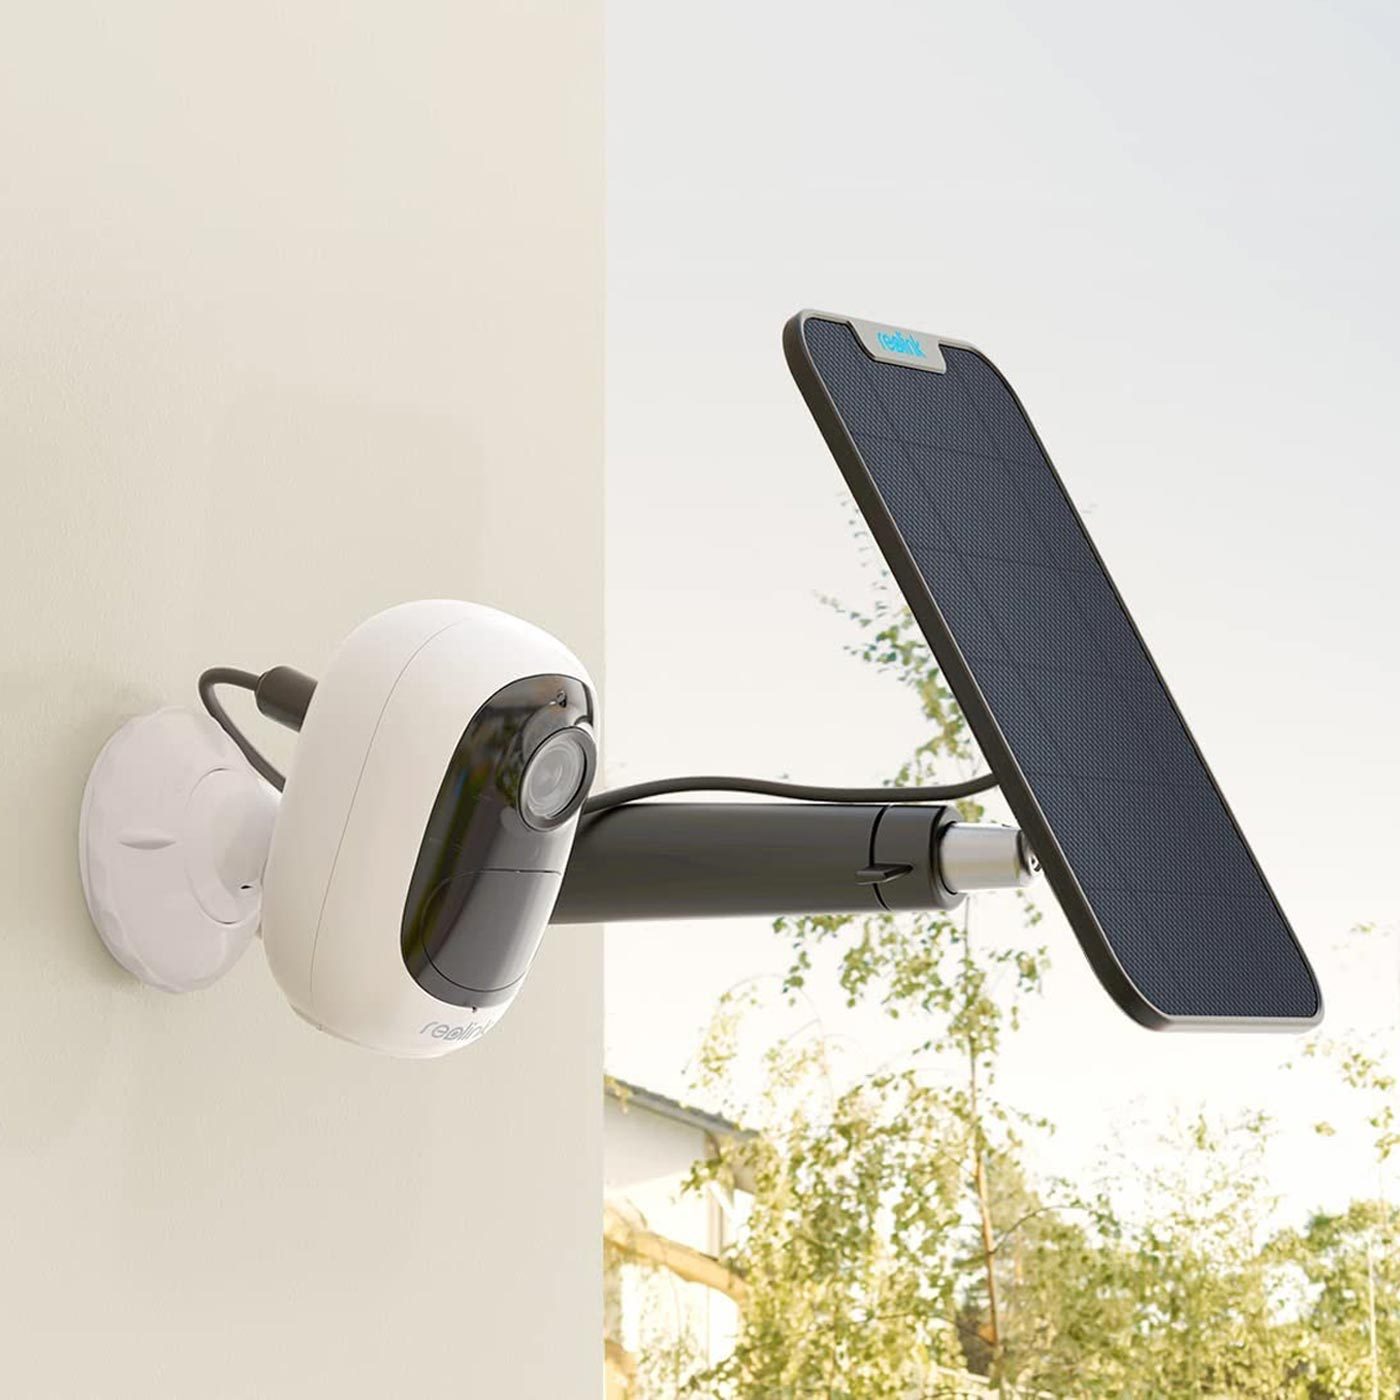 5 Best Solar Security Cameras To Keep Your Property Protected